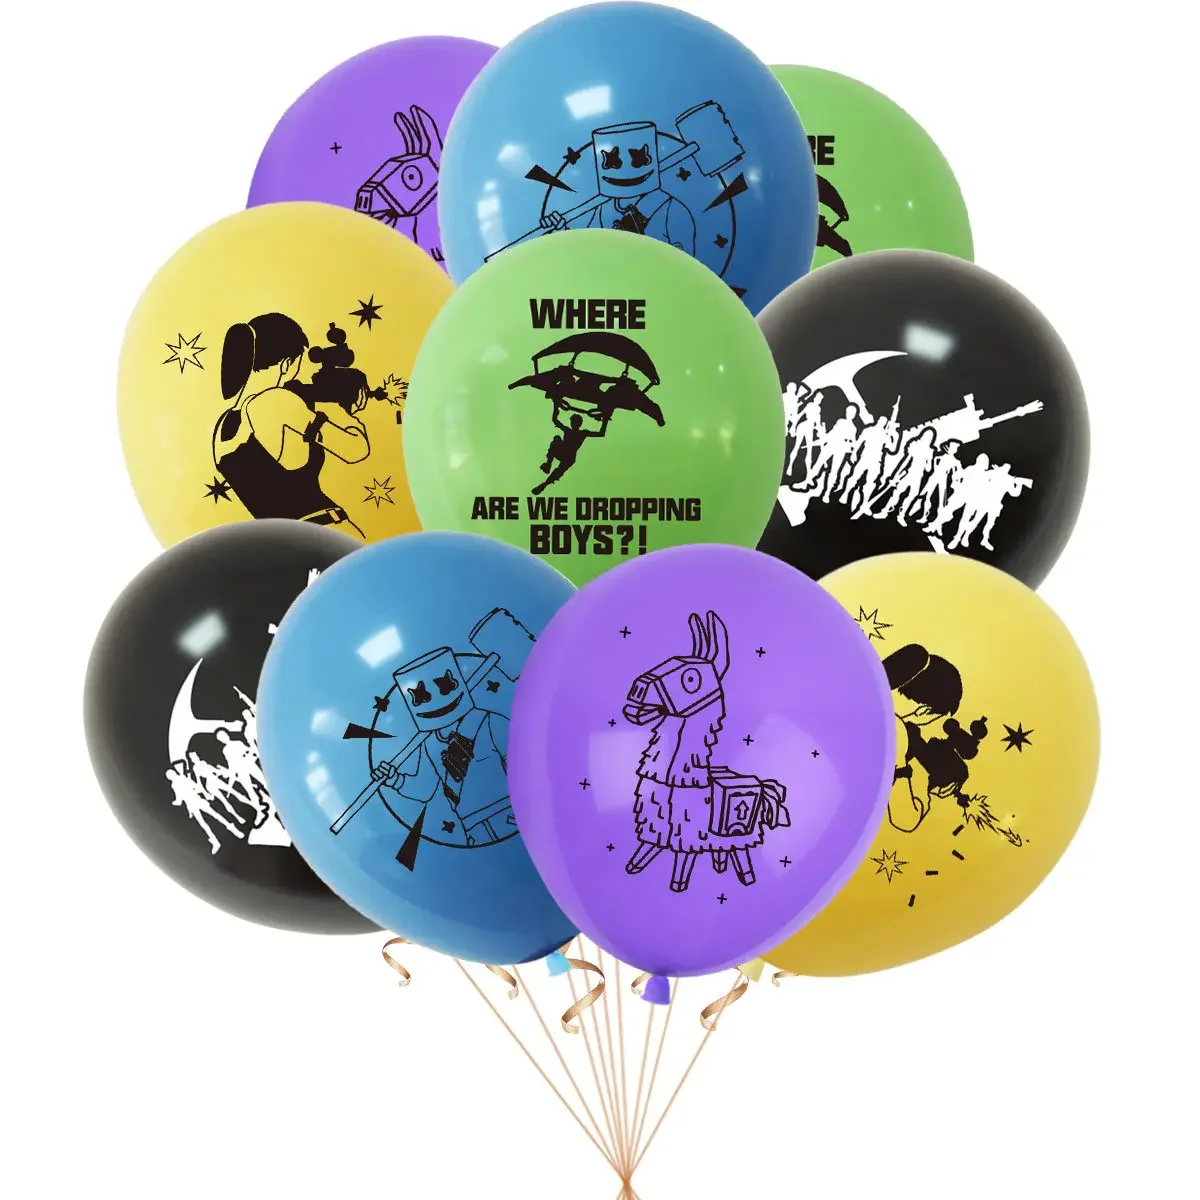 New 1Set Fortnite Party Decoration for Home Banner Cake Topper Balloon Set Hot Game Series Children Happy Birthday Supplies